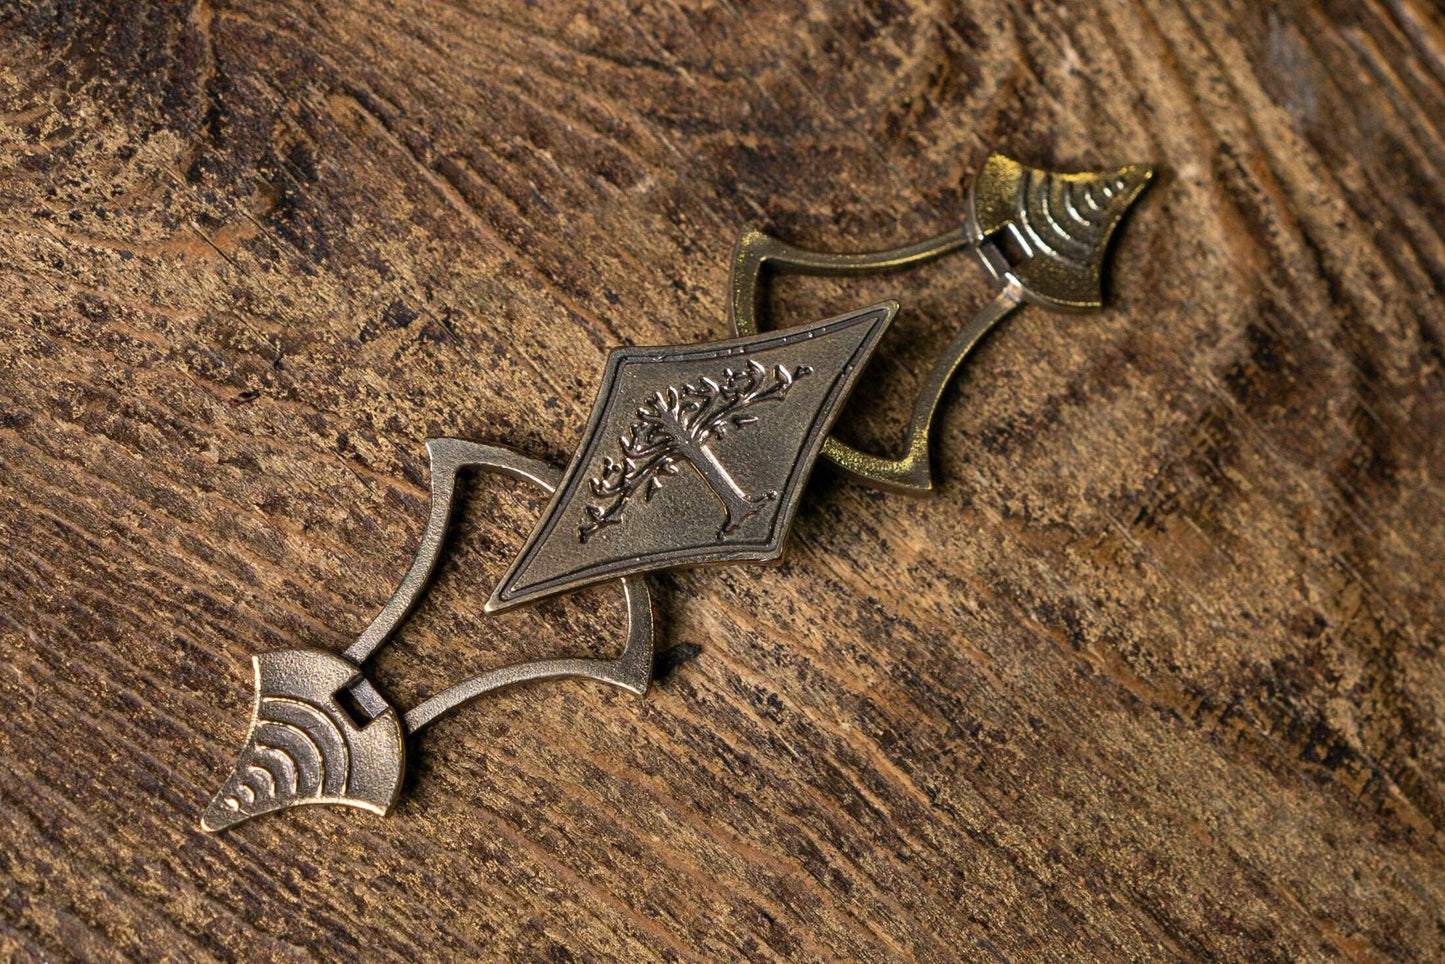 Gondor Buckles (Lord of the Rings)